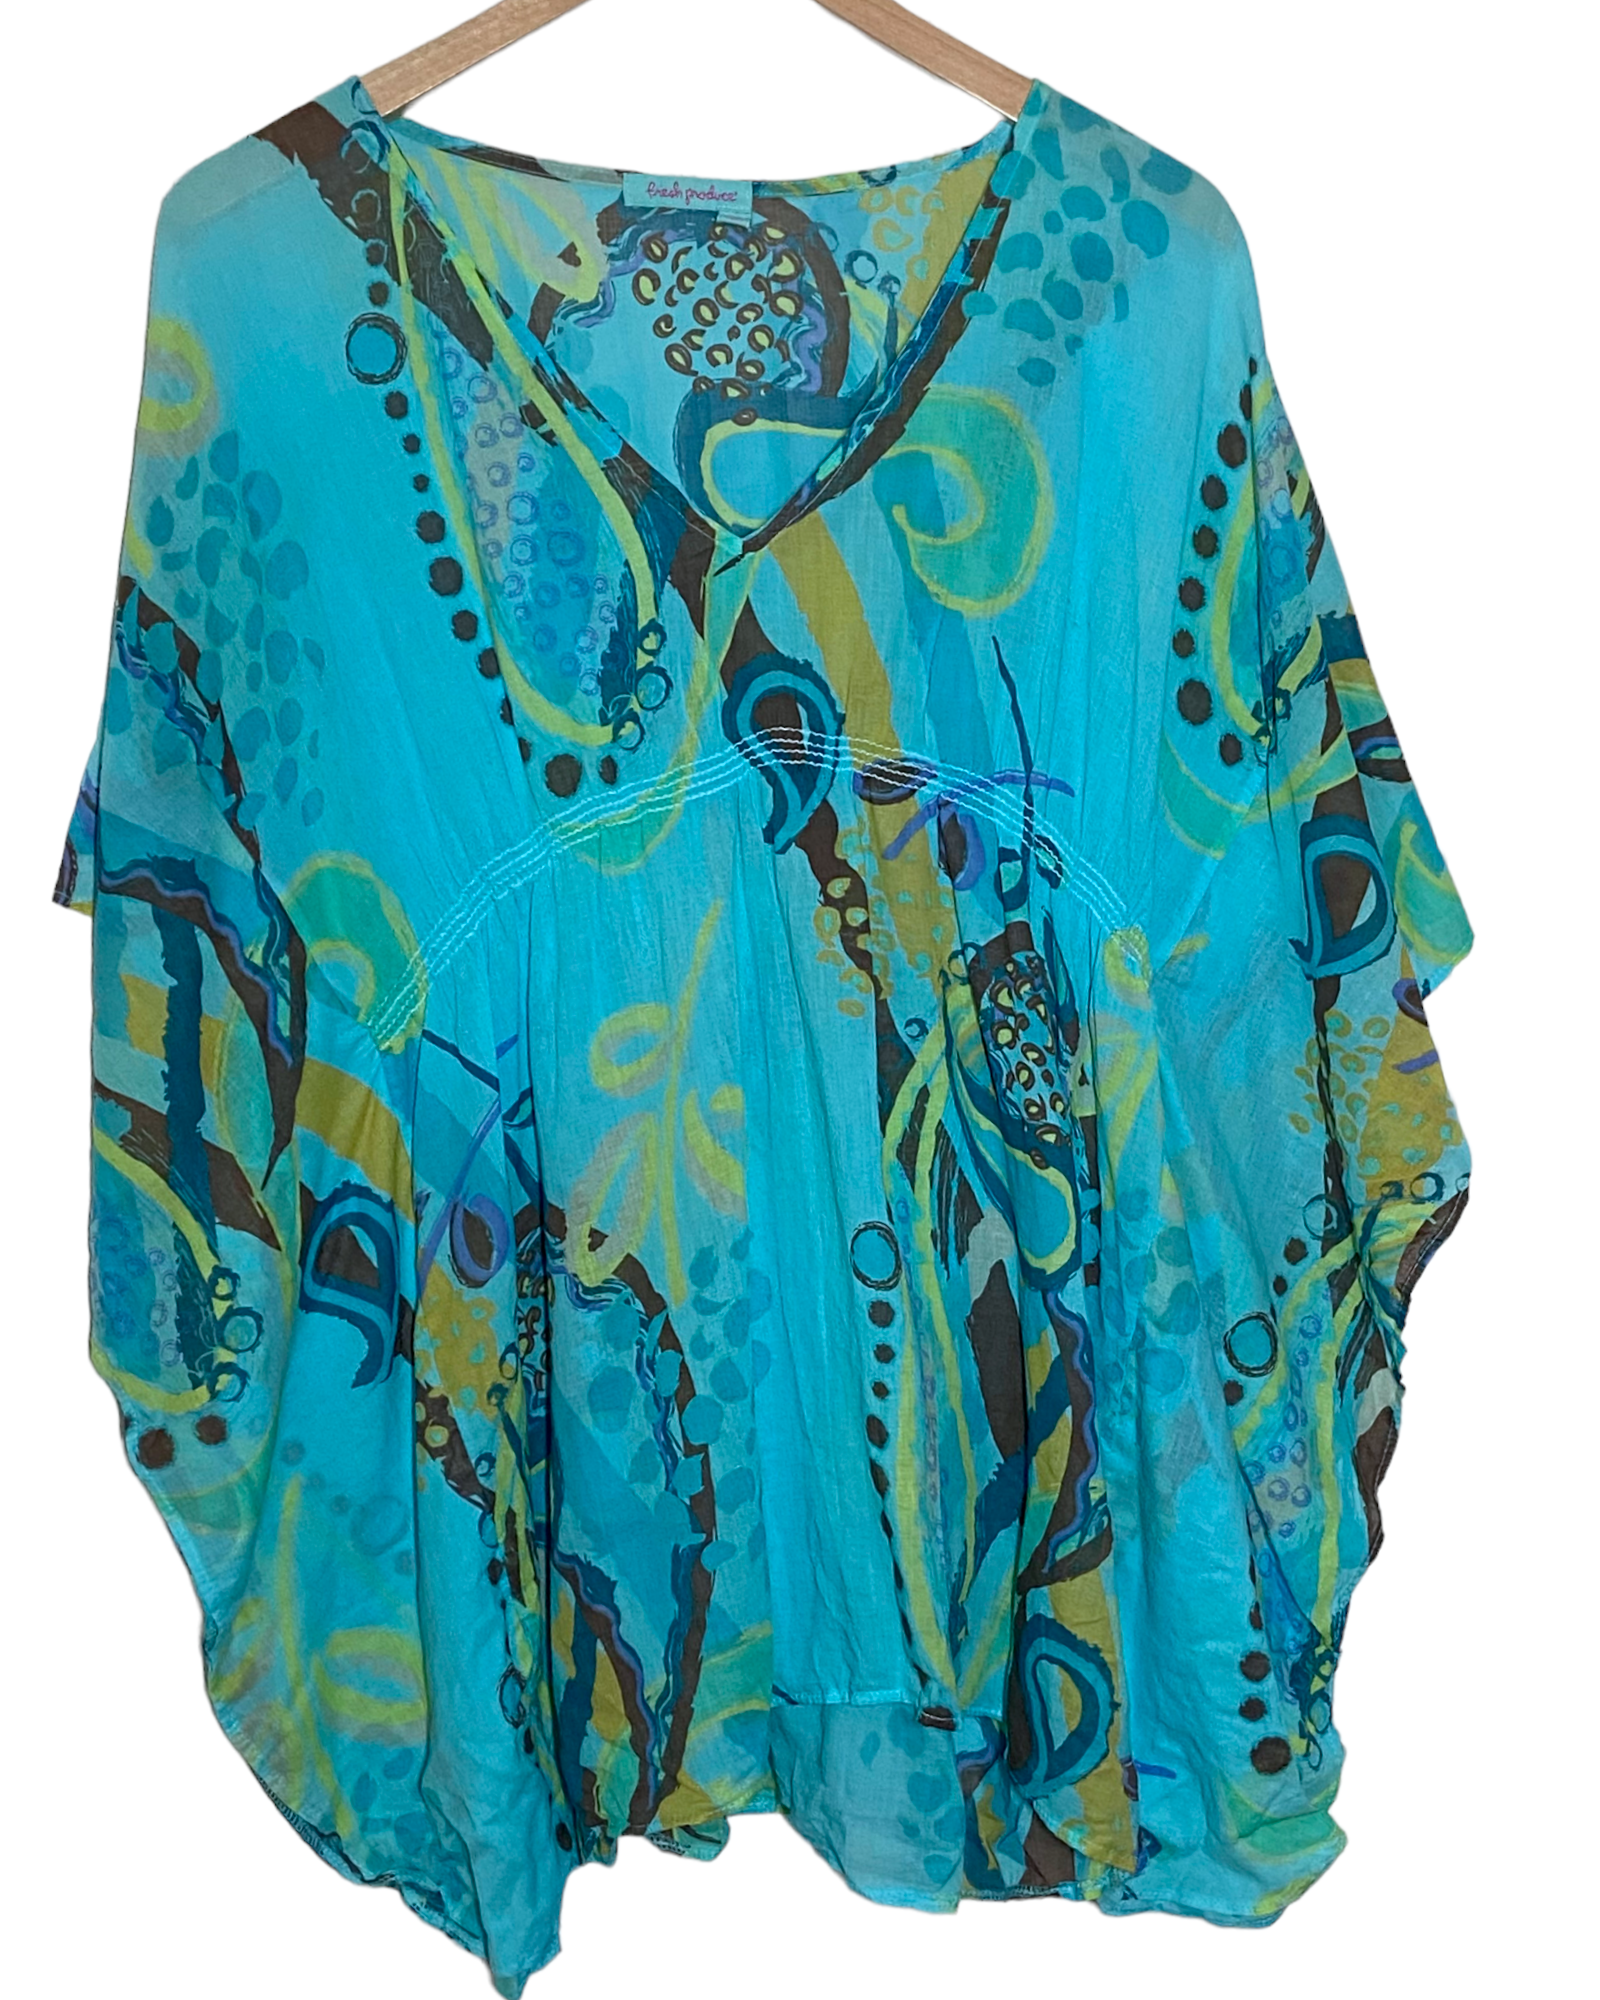 Dark Winter FRESH PRODUCE teal print cover-up